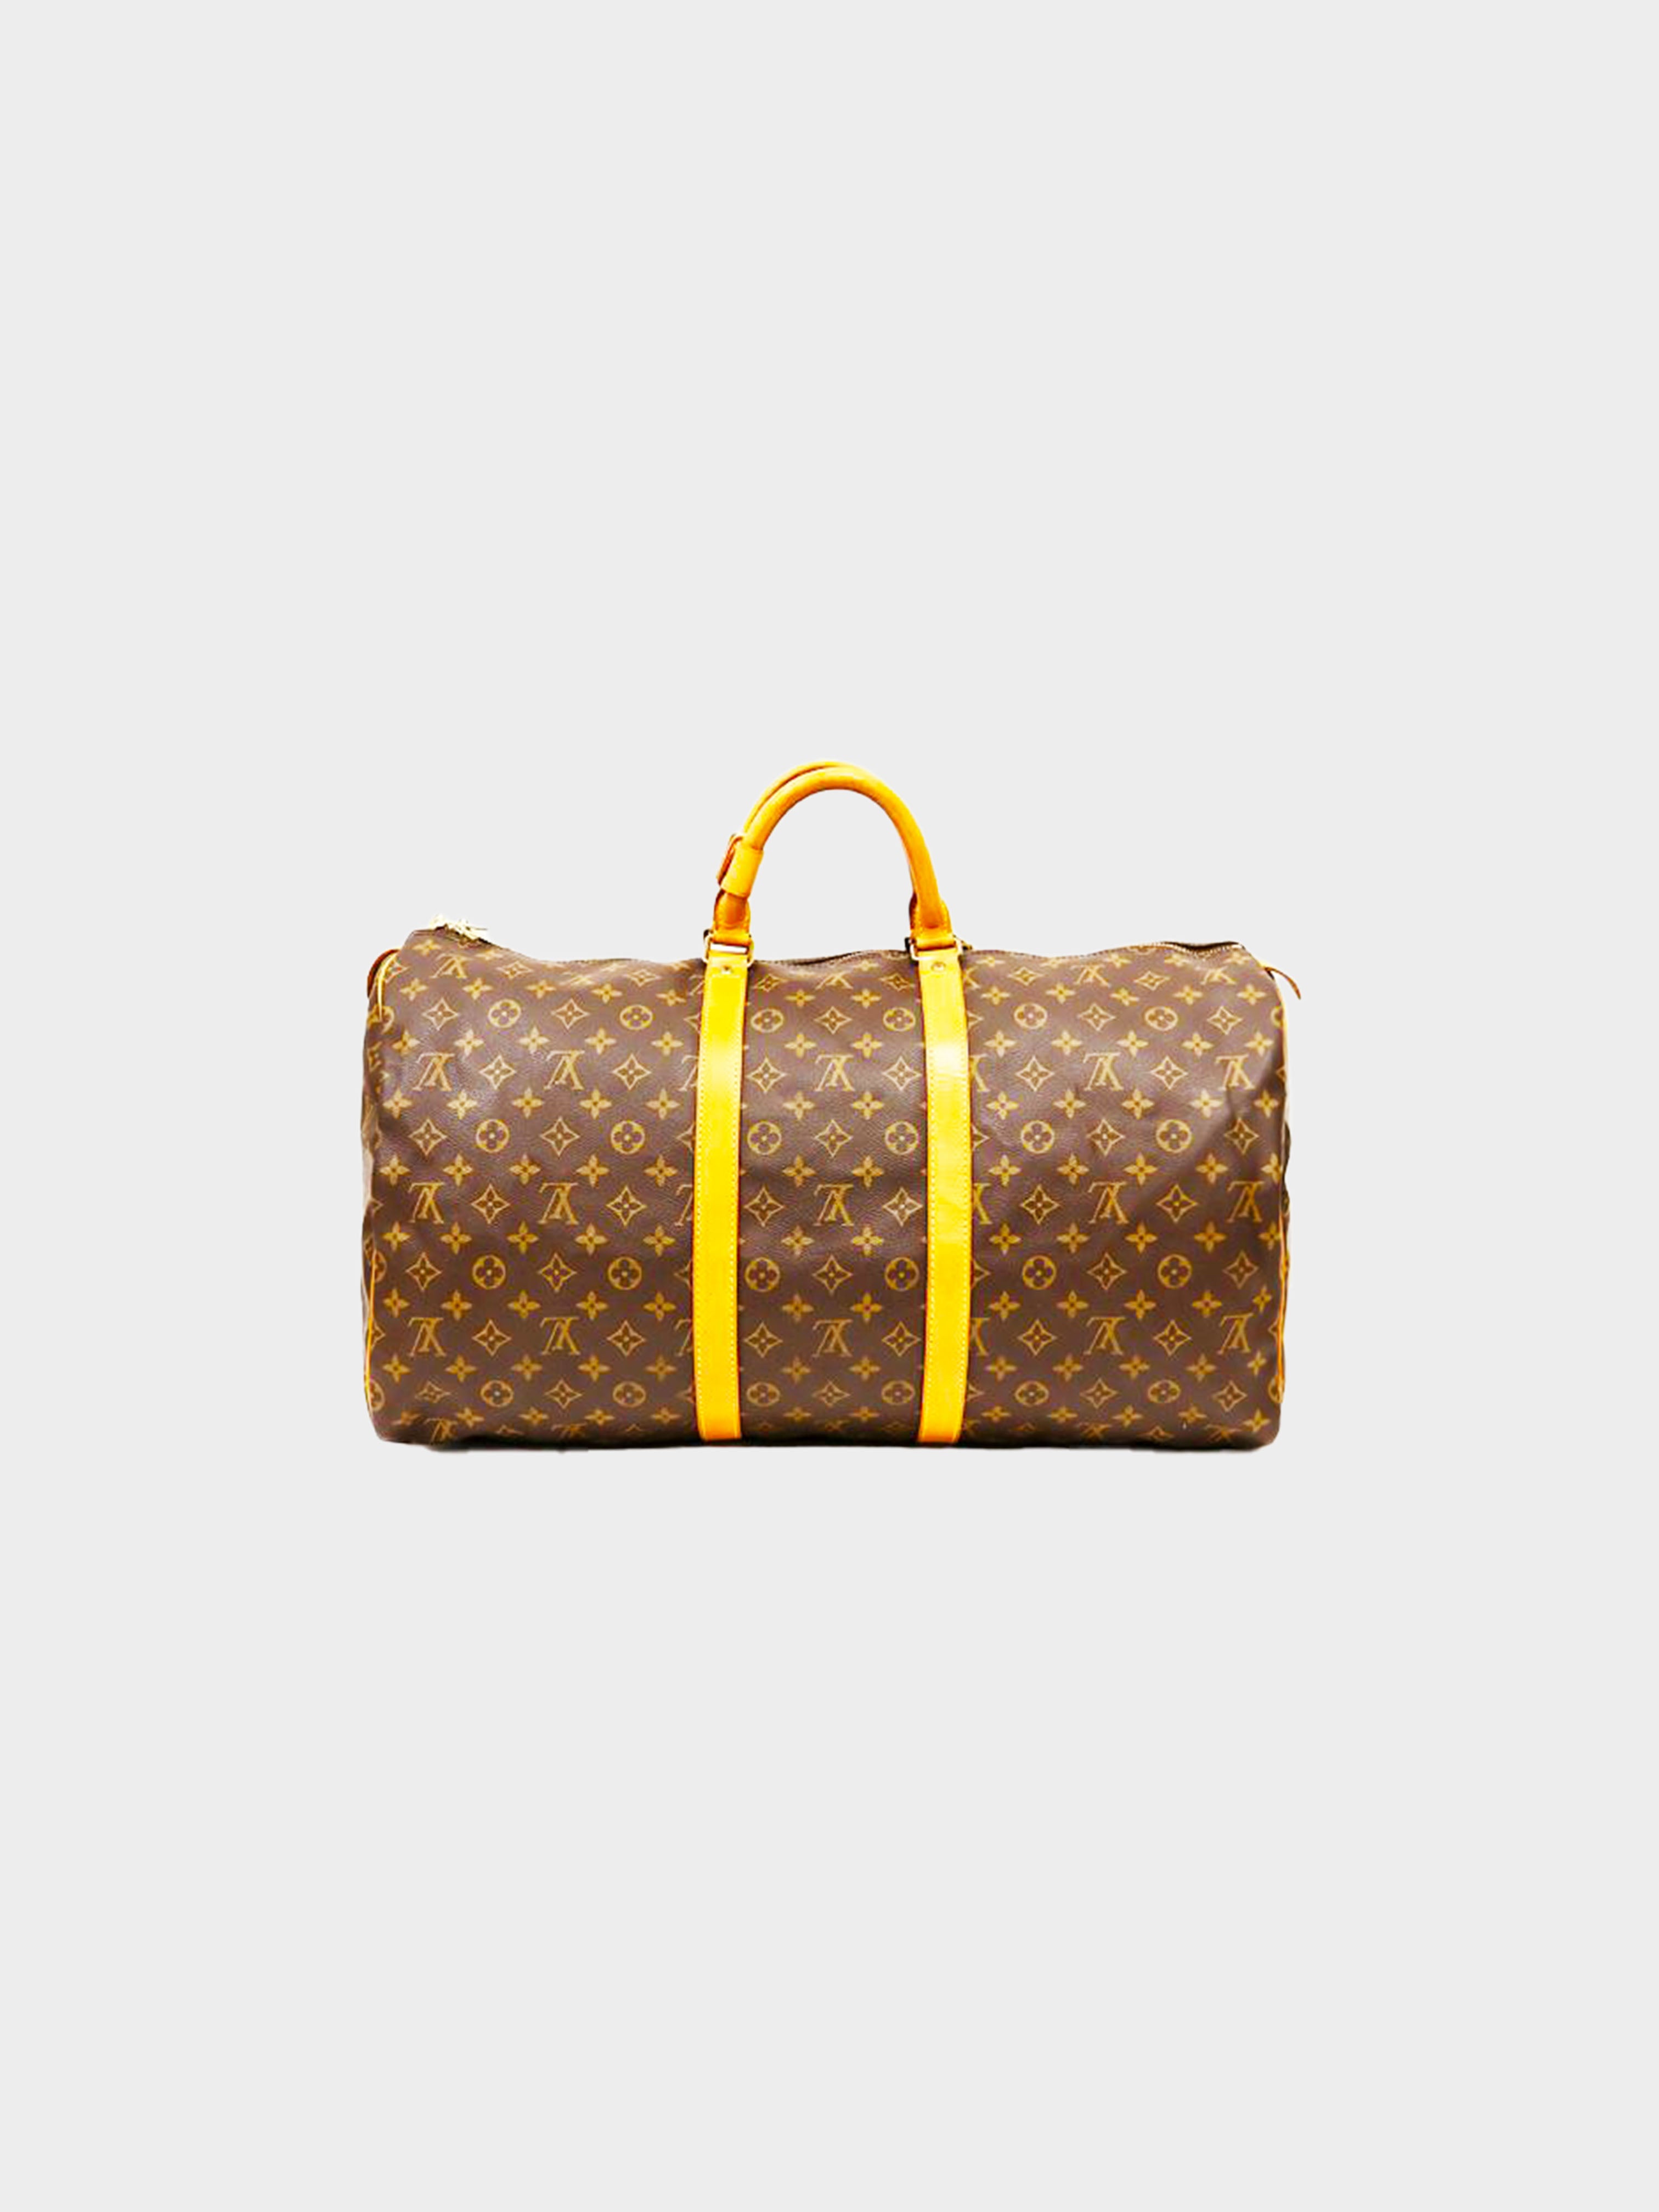 Louis Vuitton 2002 pre-owned Keepall 55 Bandouliere Holdall Bag